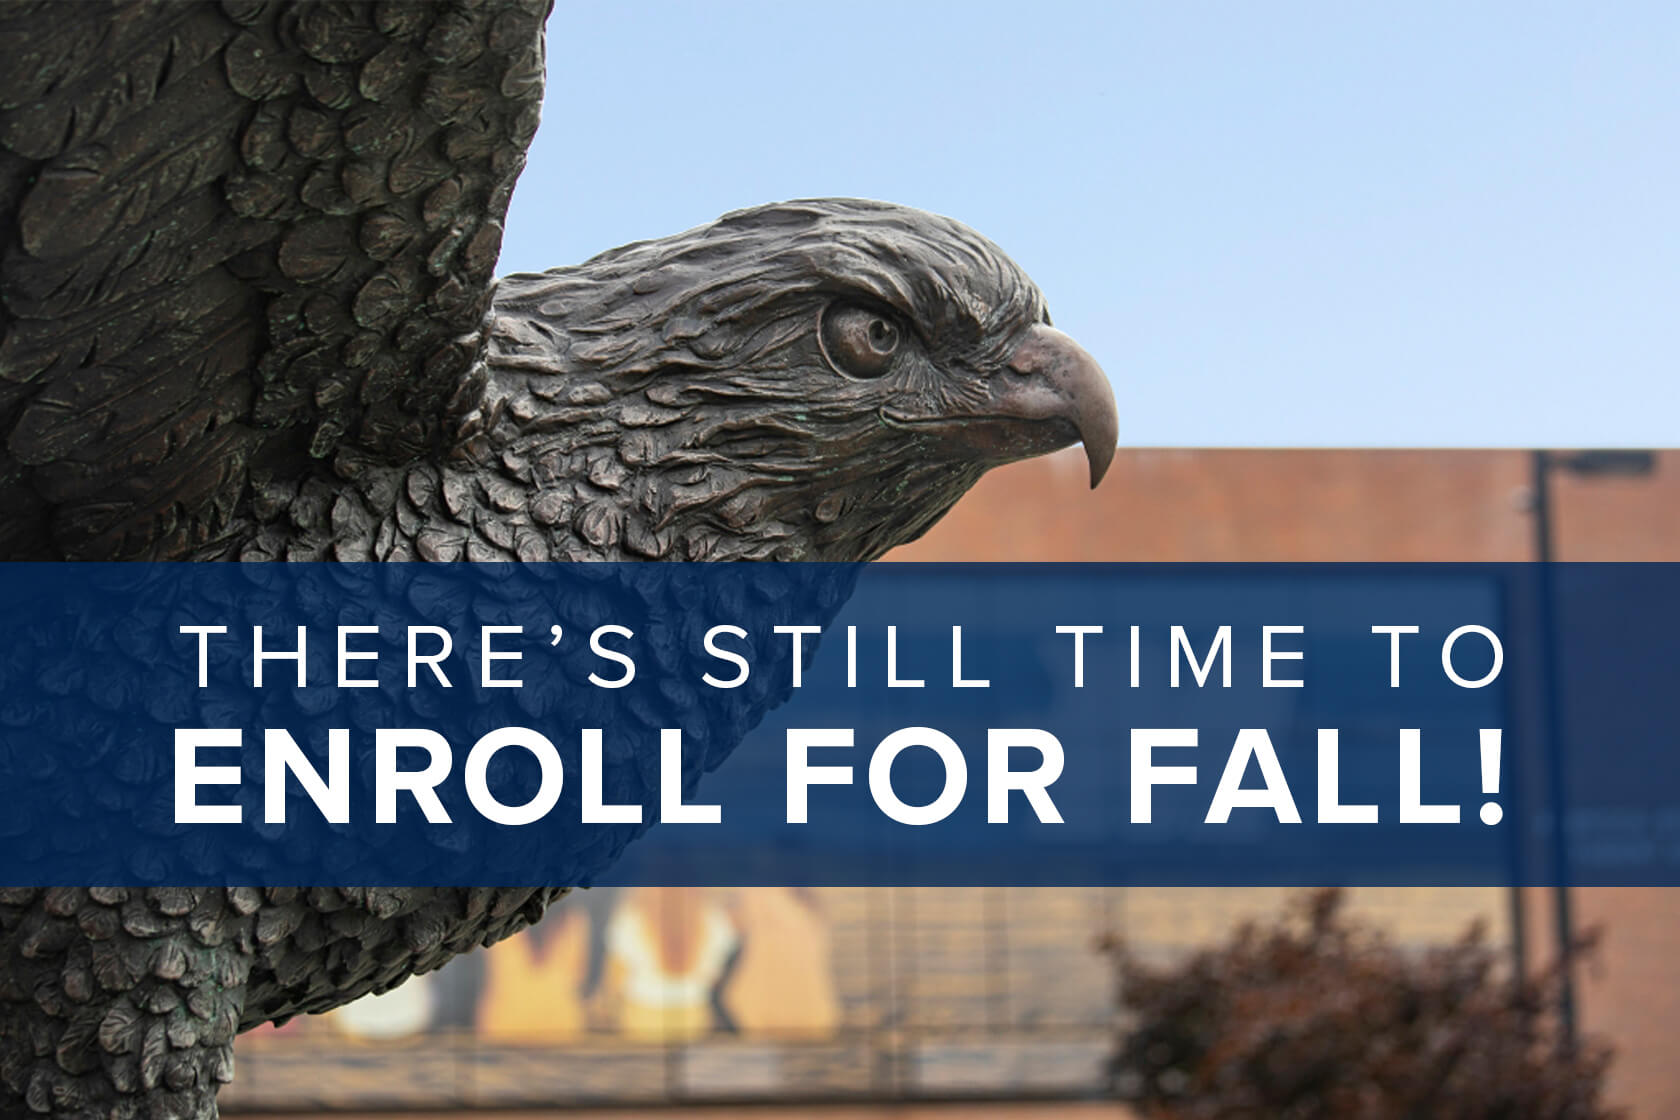 There's still time to enroll for fall!